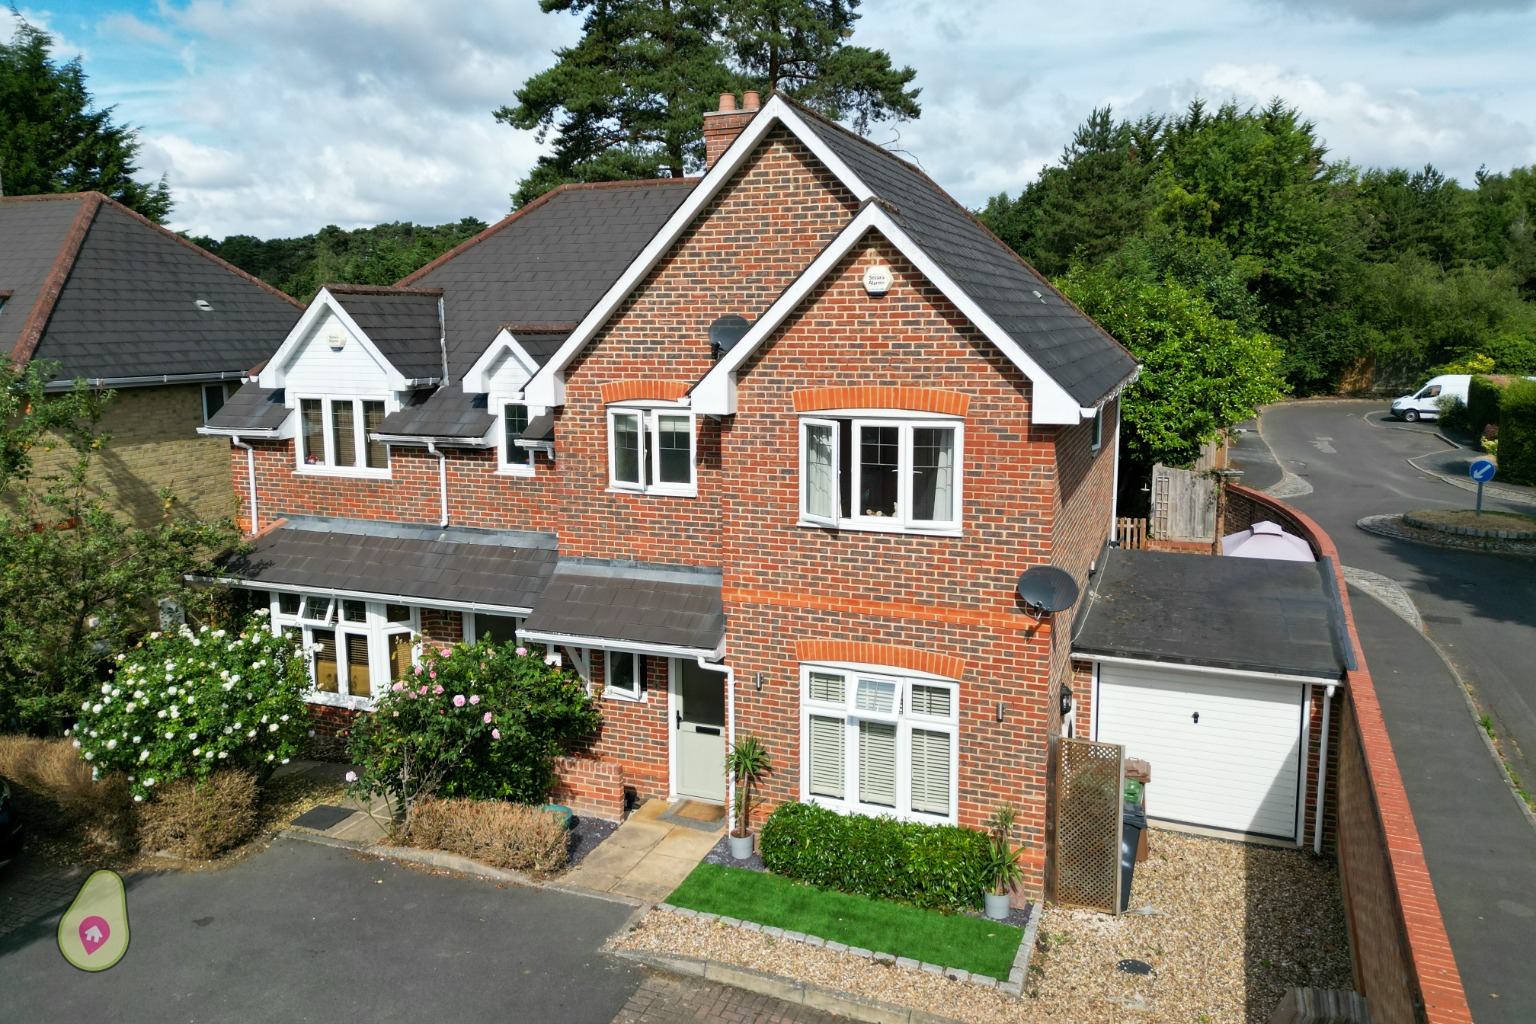 3 bed semi-detached house for sale in Badgers Copse, Camberley, GU15